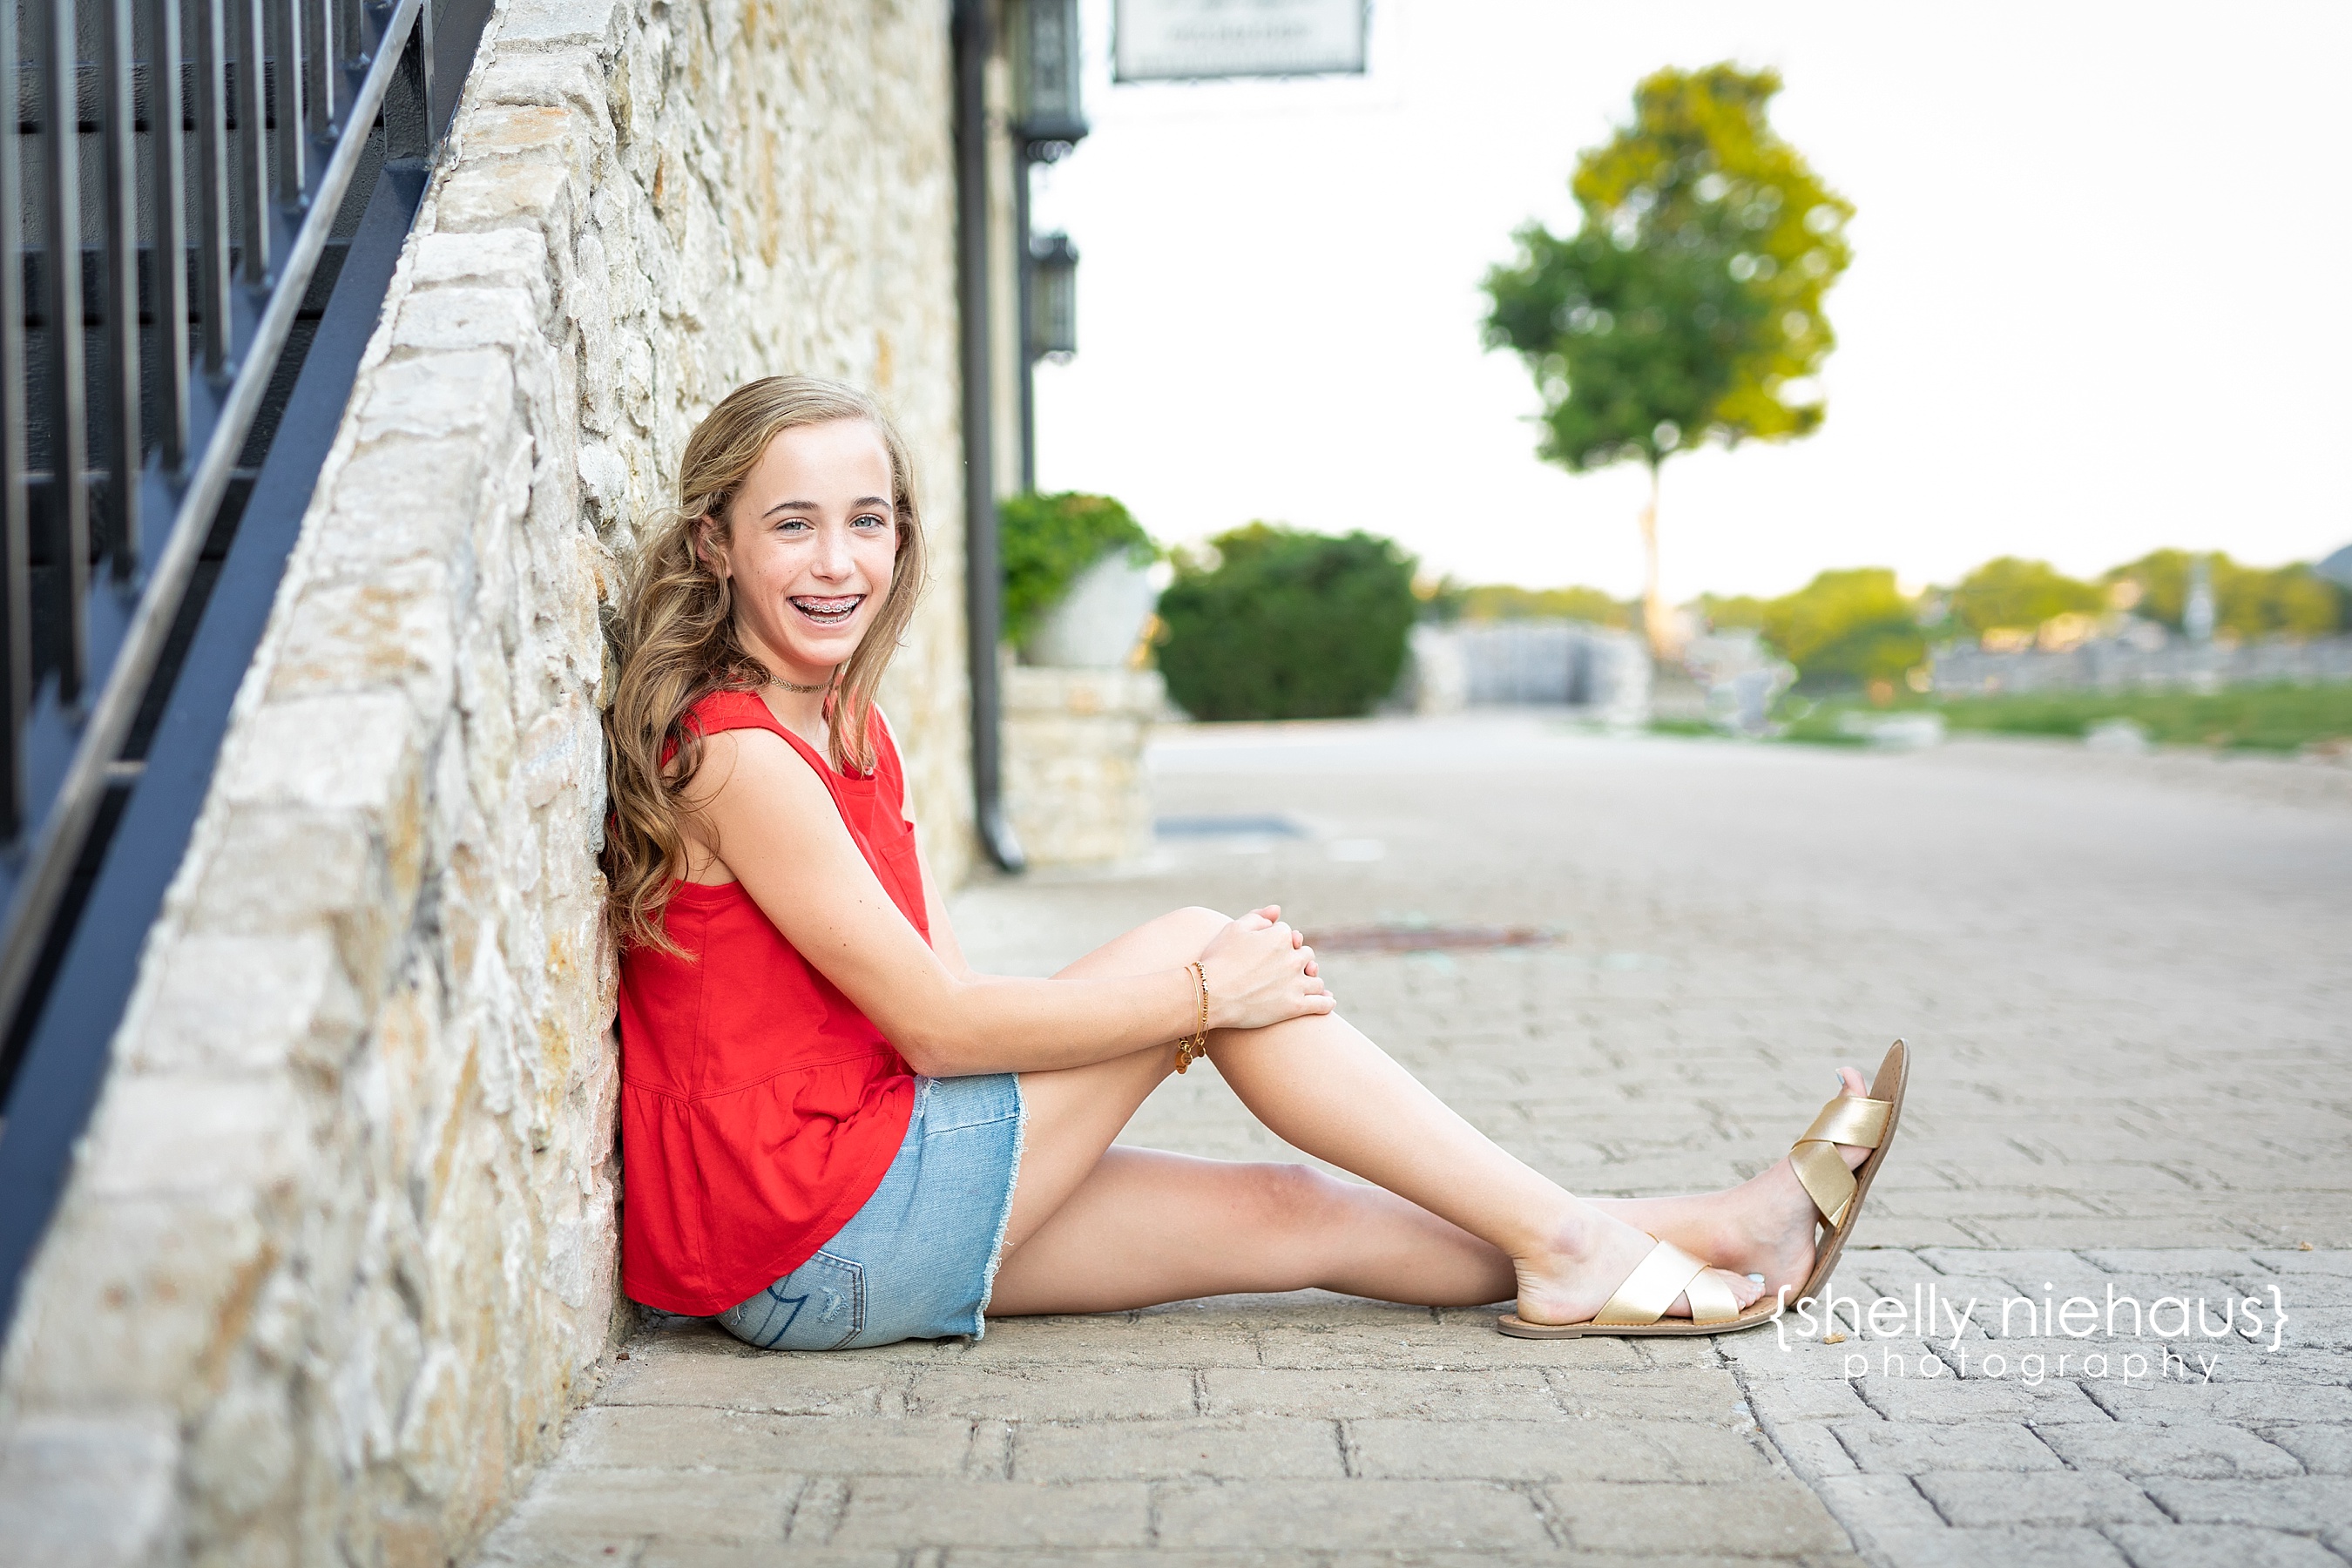 How to pose with tween/teen Girls, Family photo ideas with older girls